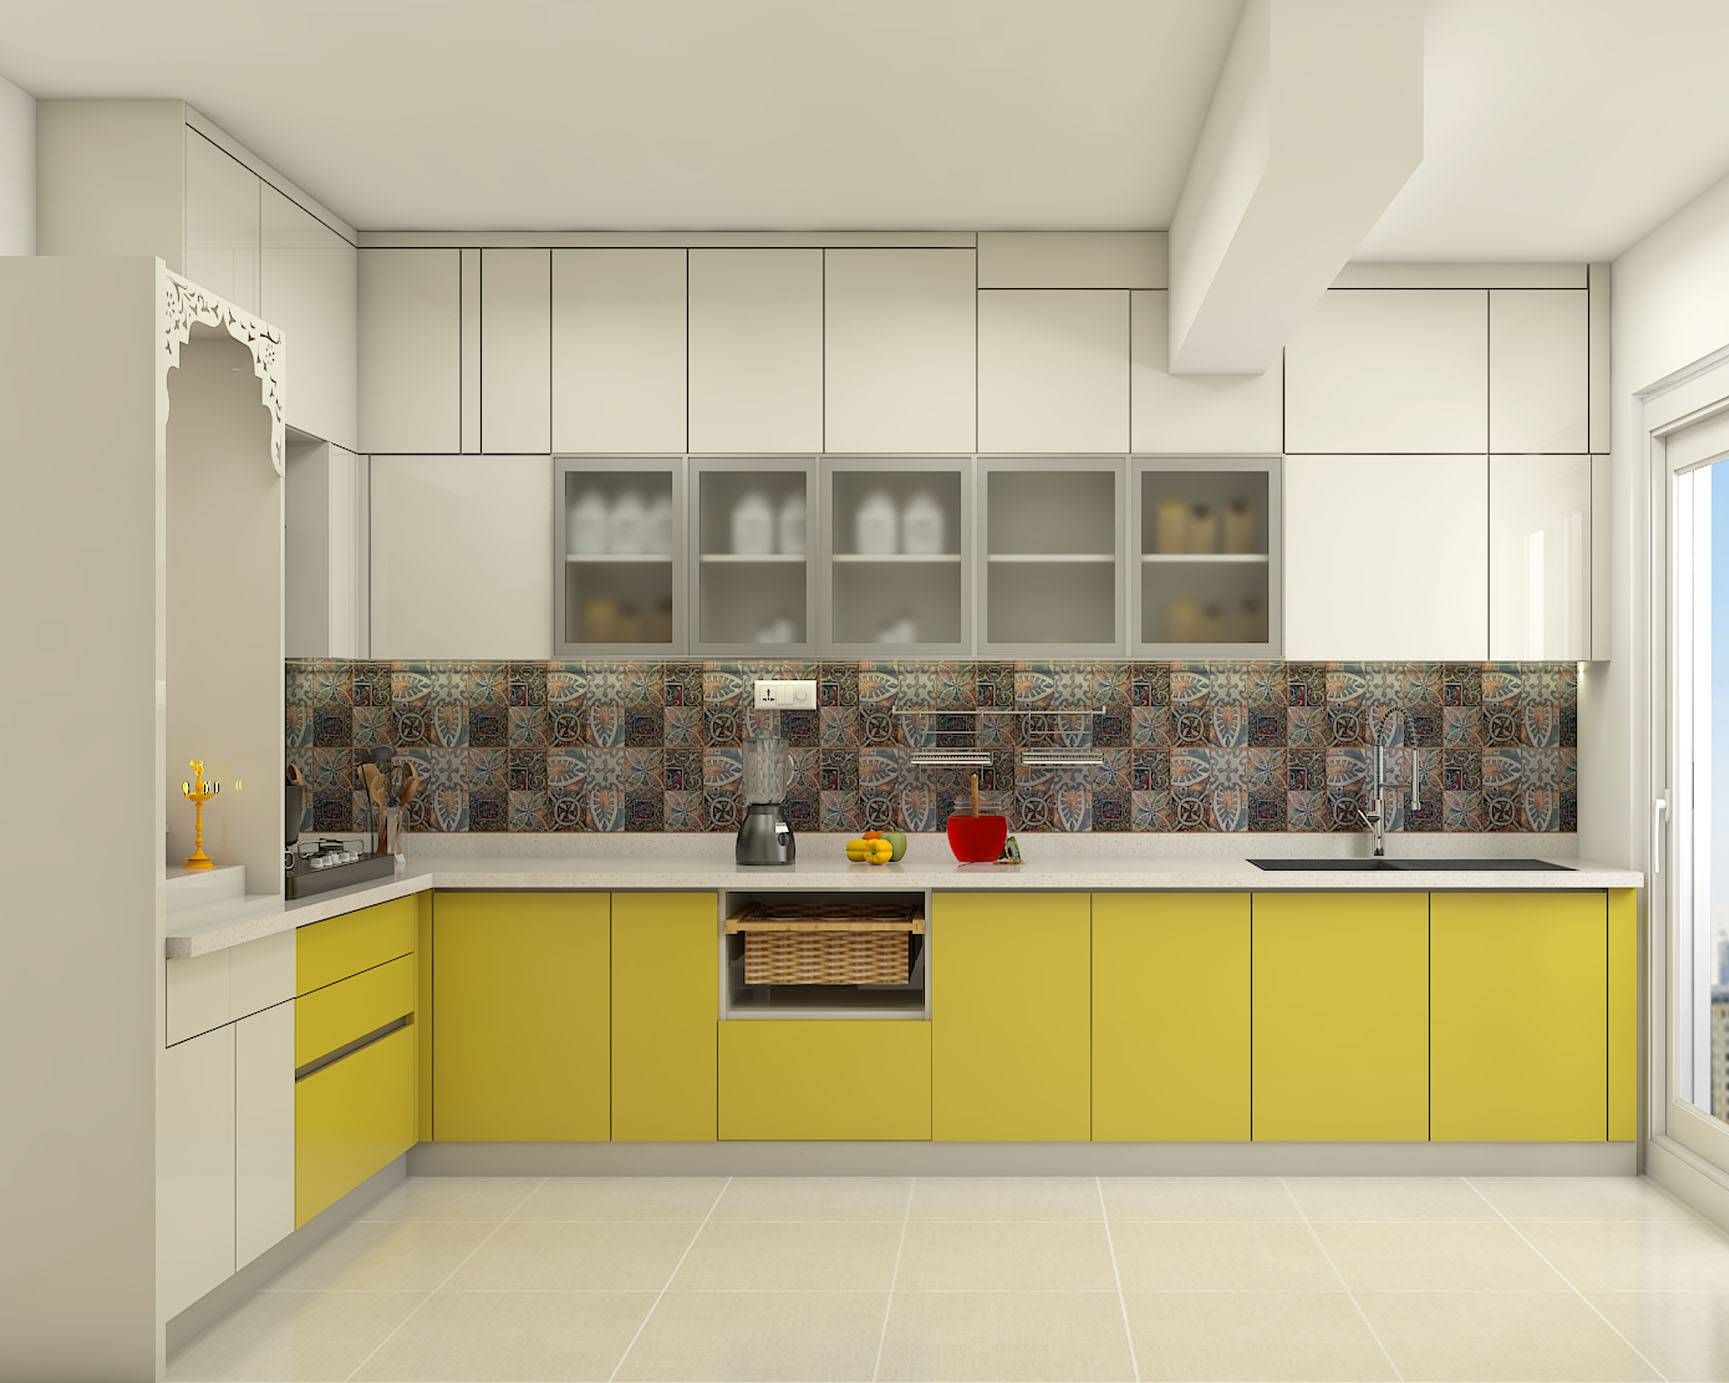 Modular Spacious Kitchen With L-Shaped Layout